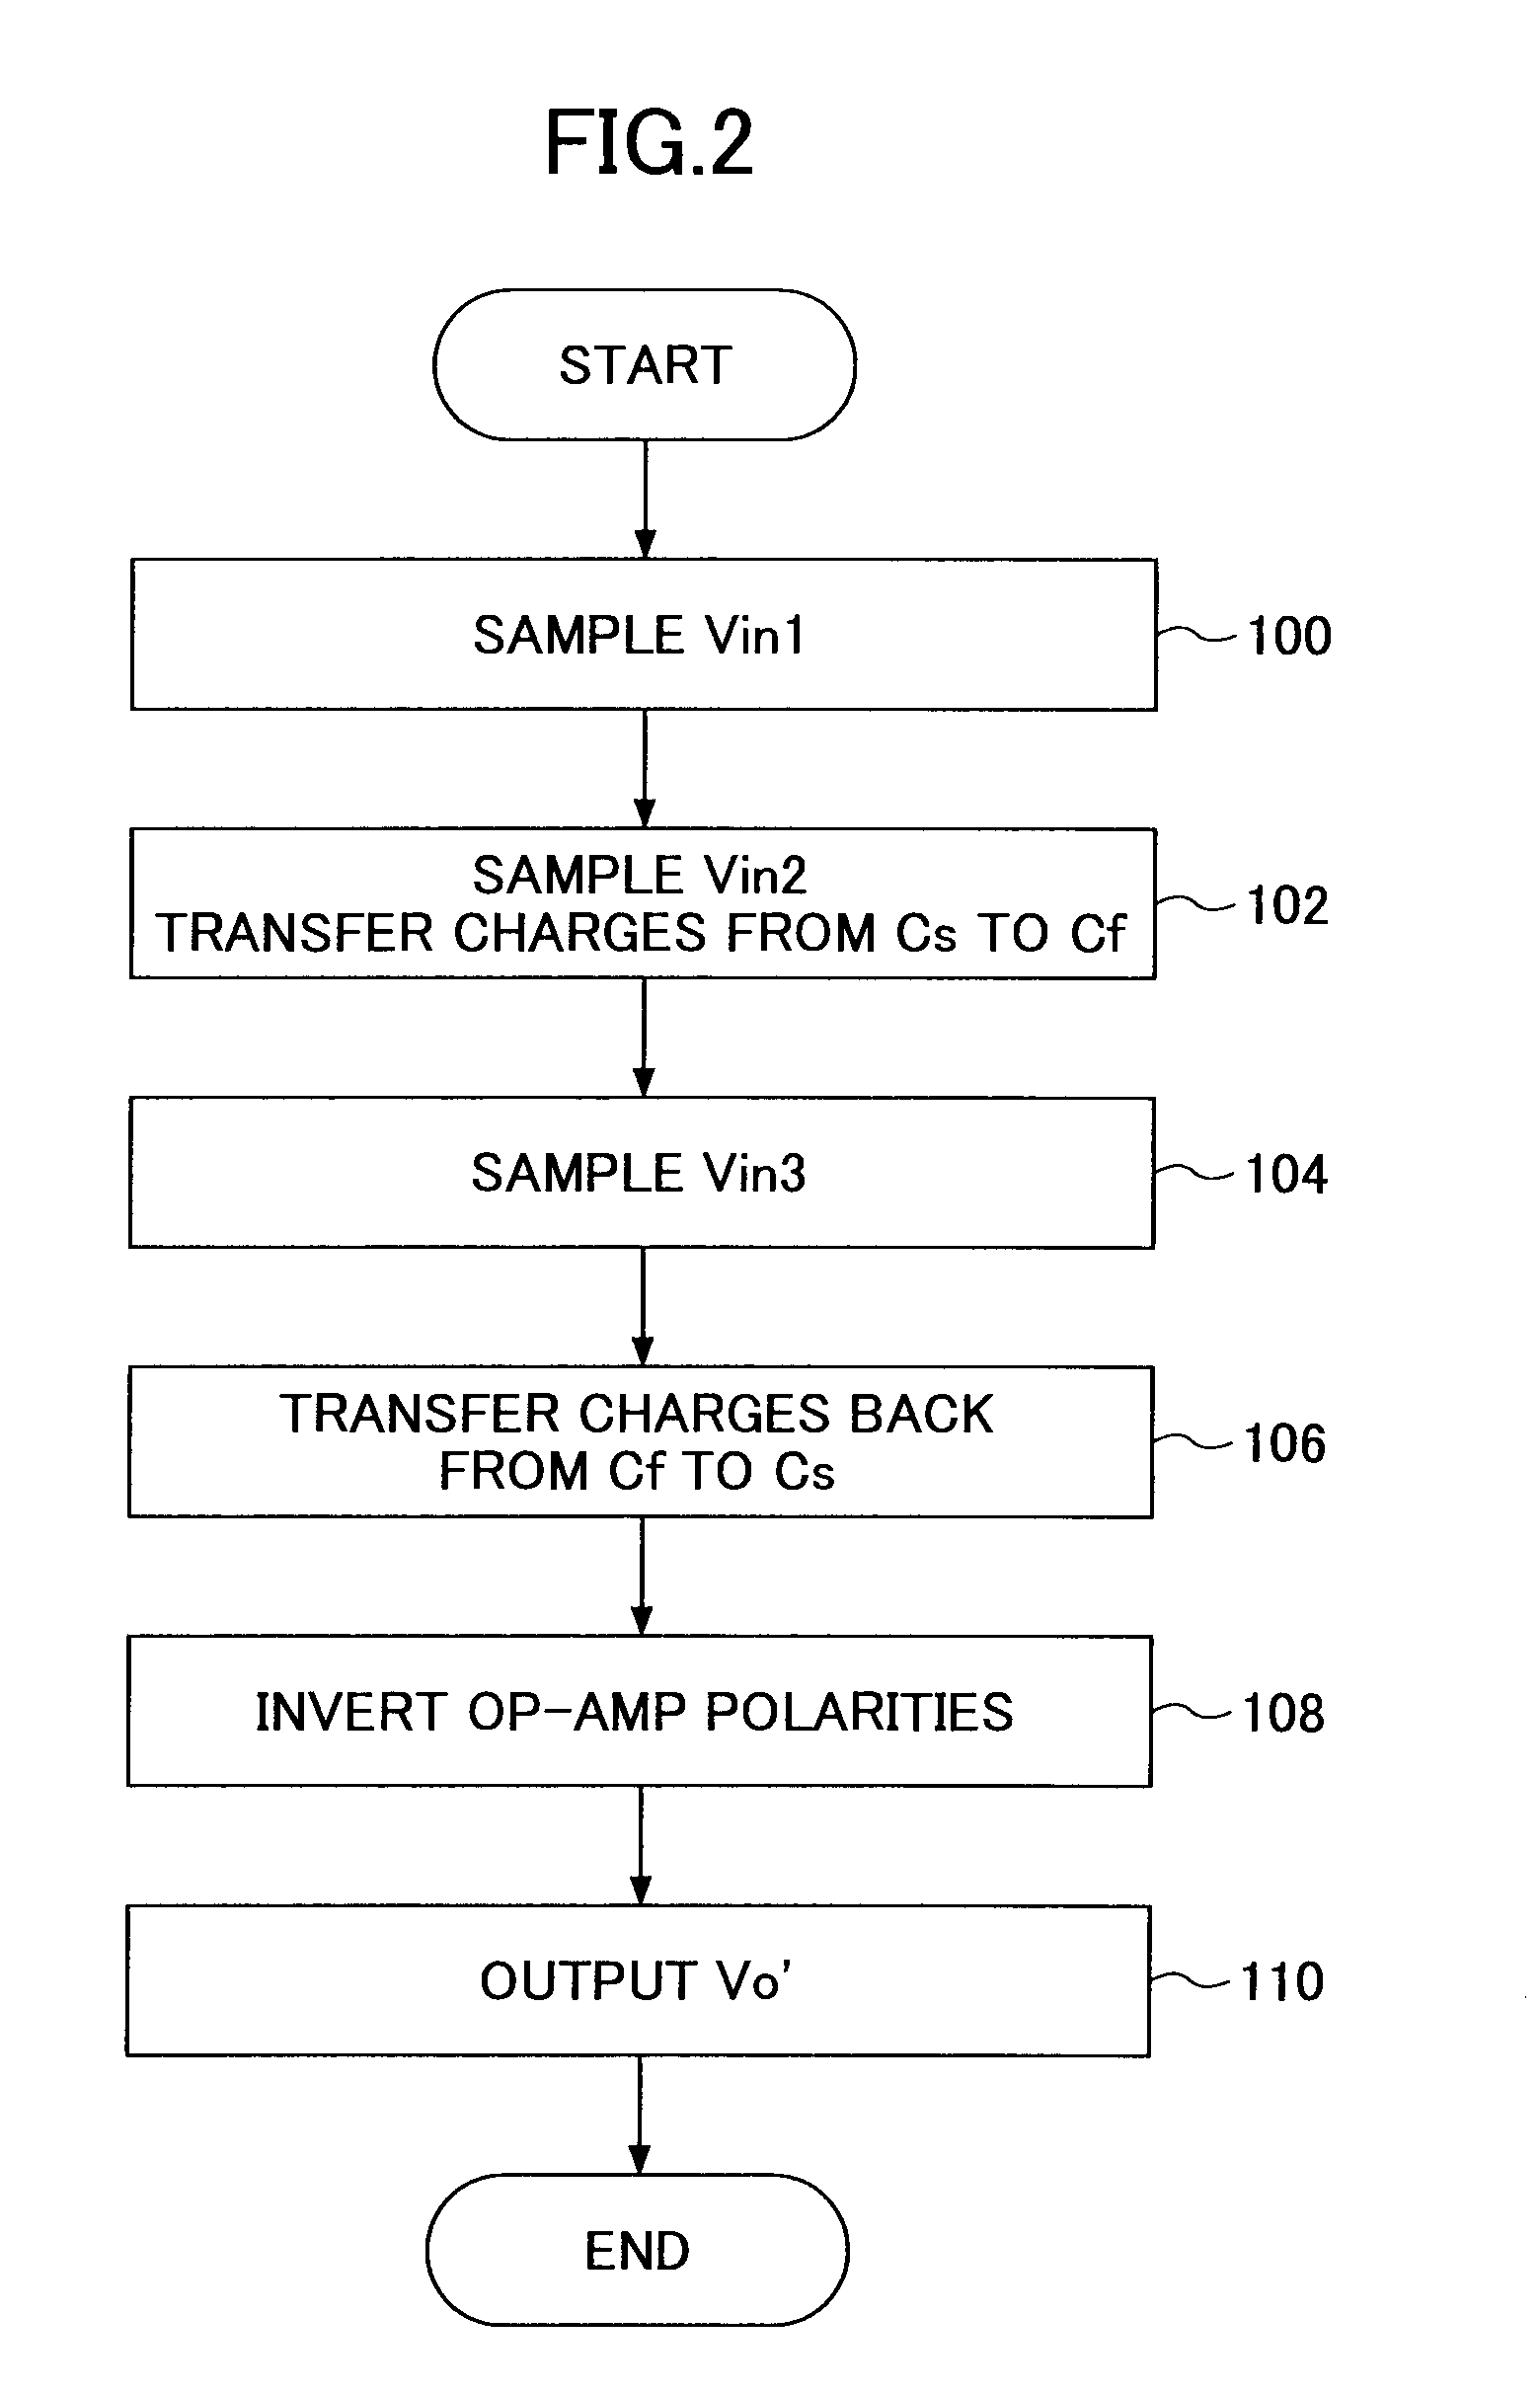 Sample and hold circuit and a/d converter apparatus